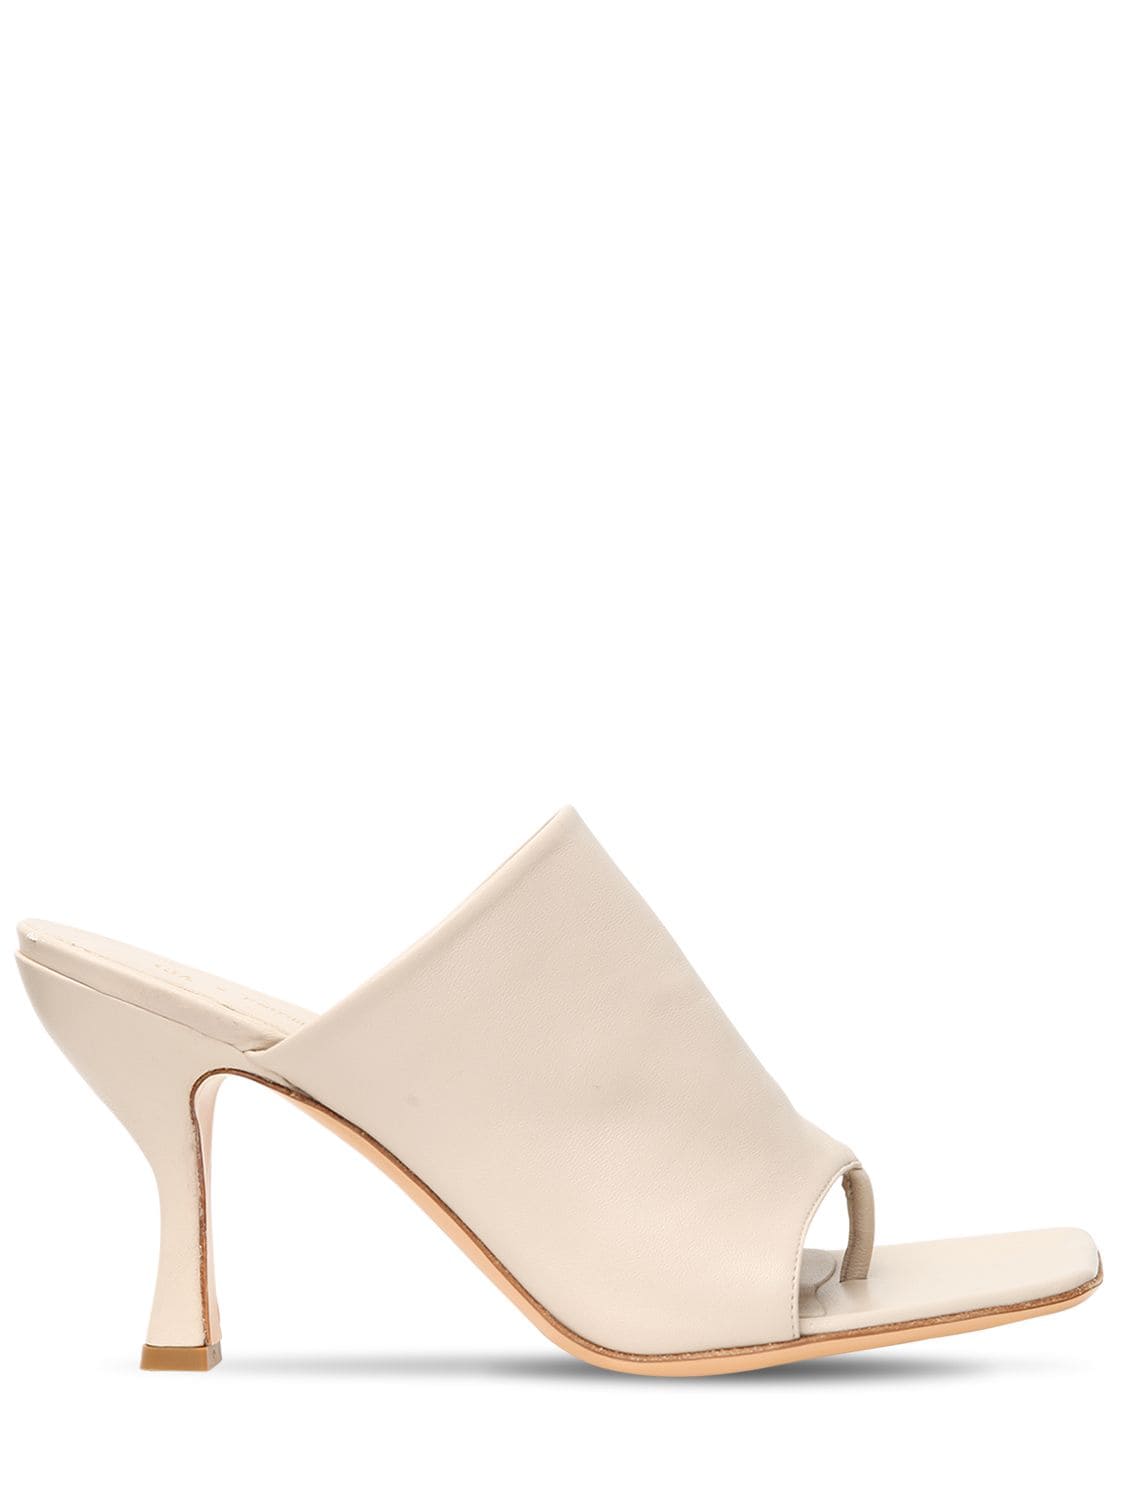 Gia X Pernille Teisbaek 80mm Leather Thong Sandals In Nude